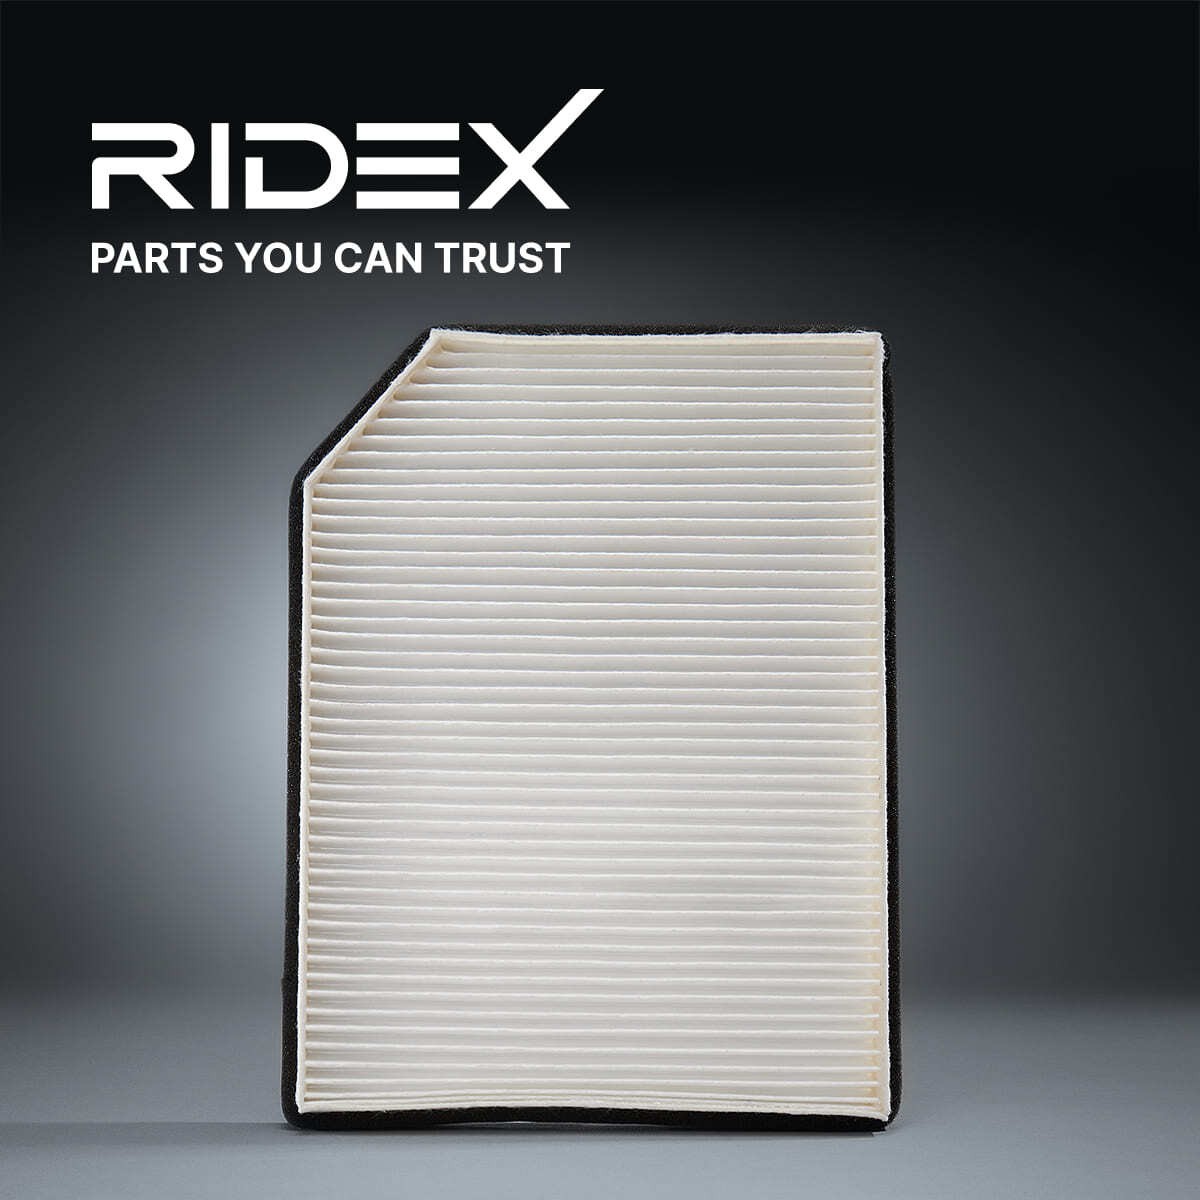 424I0158 Air con filter 424I0158 RIDEX Particulate Filter, 200 mm x 187 mm x 20 mm